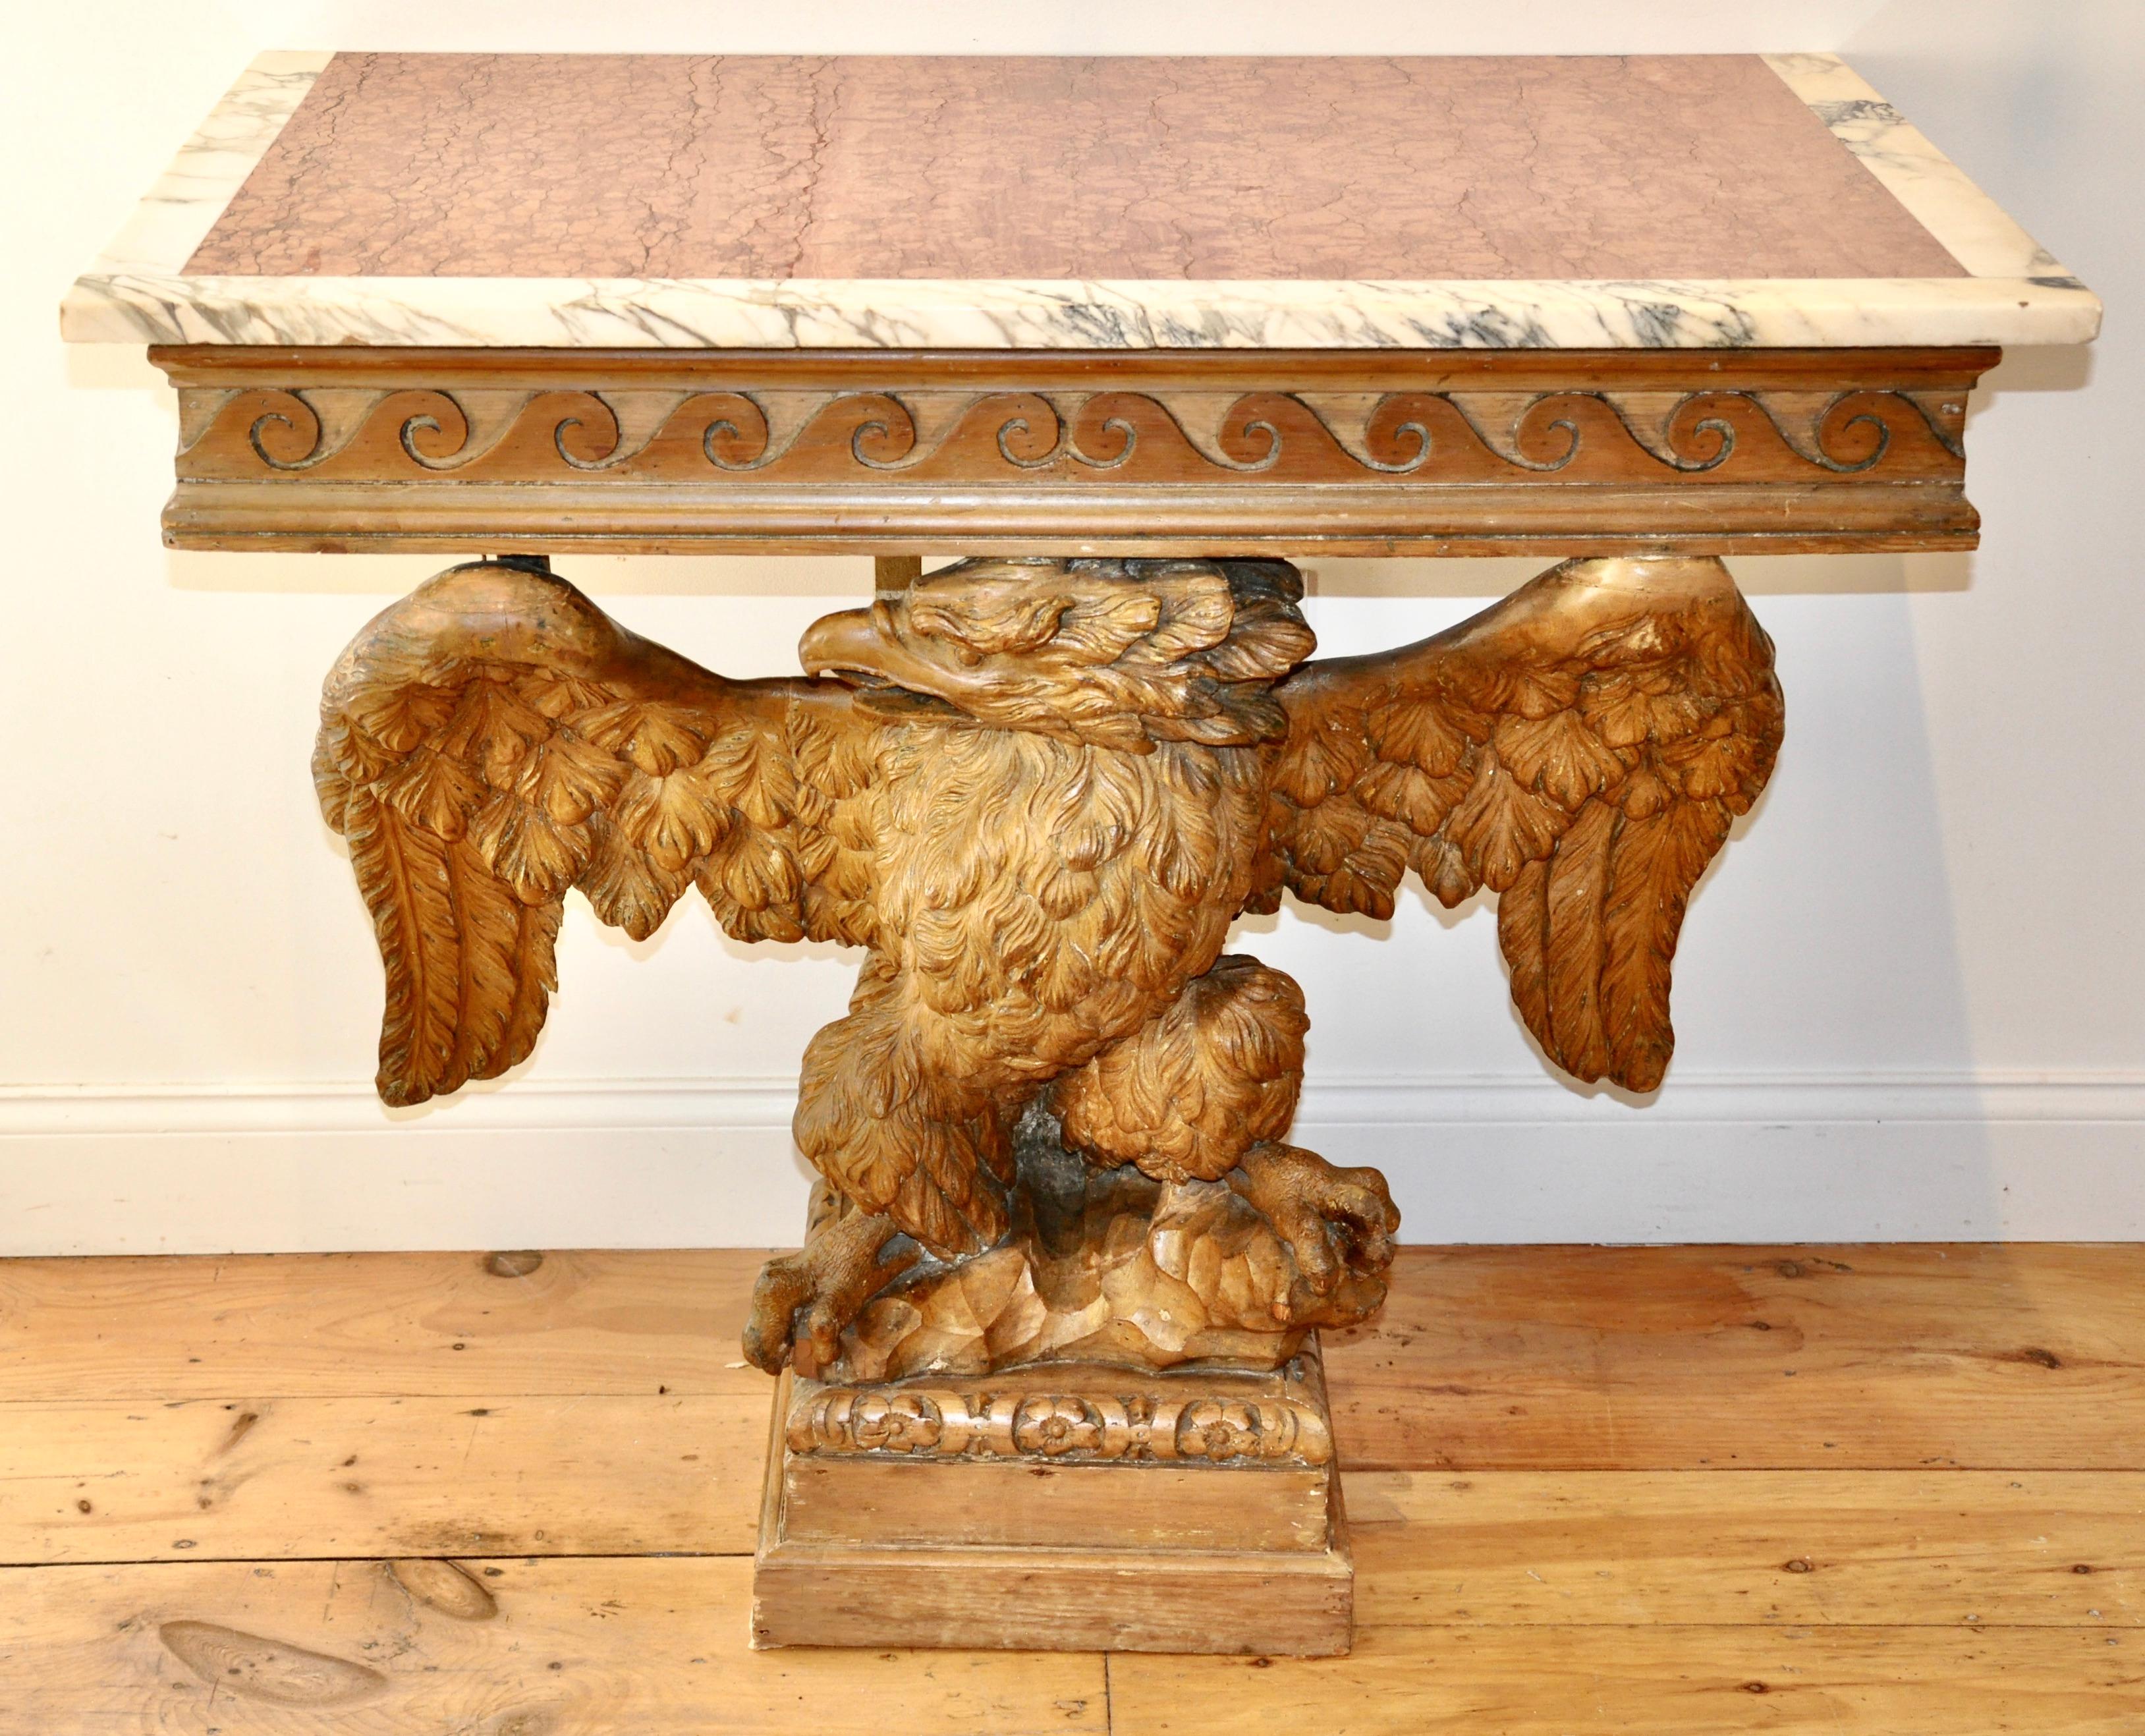 Pair of Early to Mid-18th Century George II Marble Top Eagle Console Tables in Manner of William Kent

Well carved eagles clutching rocks. Wings spread. Top frieze in Neoclassical Running Dog Motif. Early if not original orange marble with white